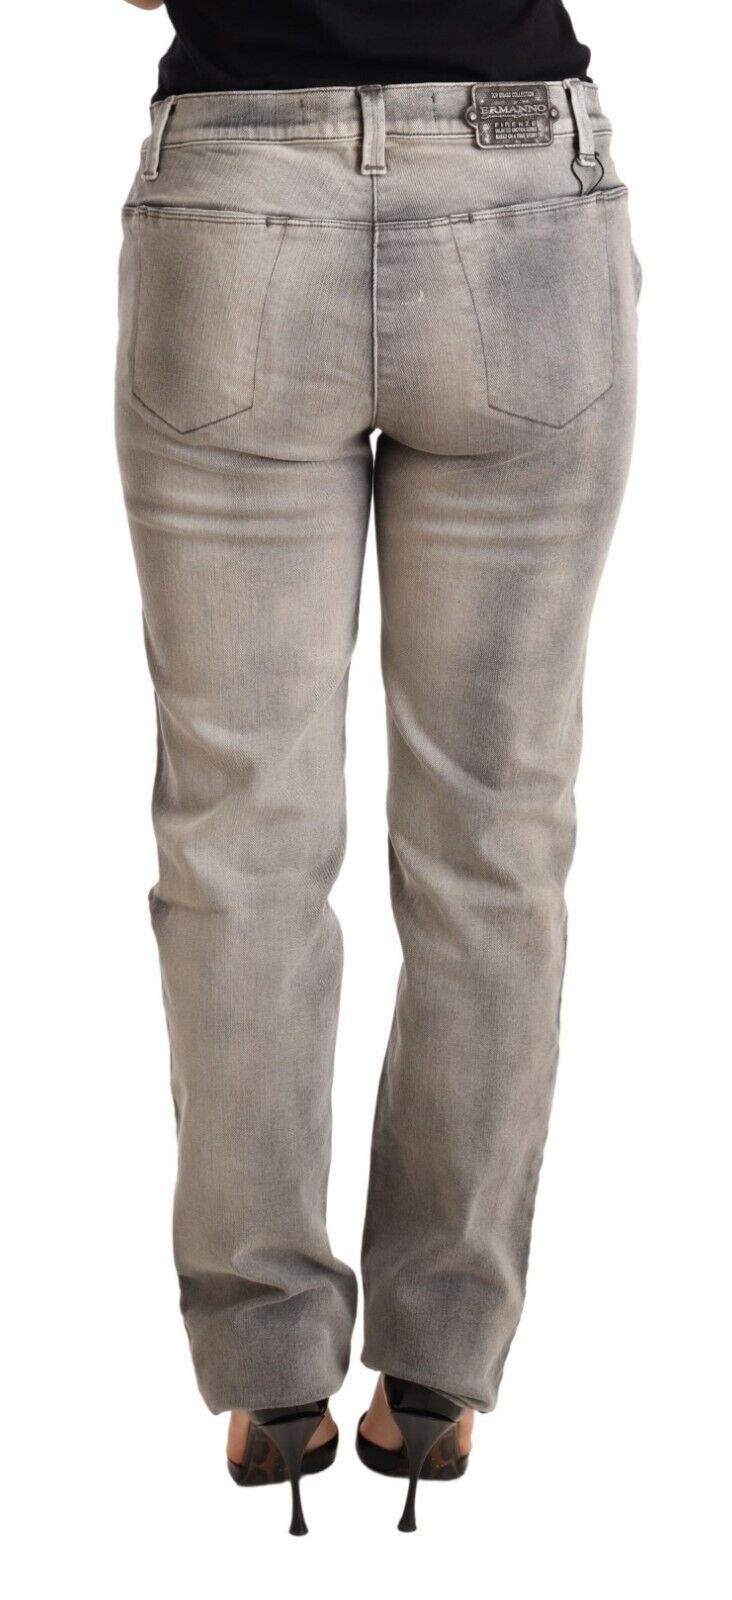 Ermanno Scervino Chic Gray Washed Low Waist Skinny Jeans